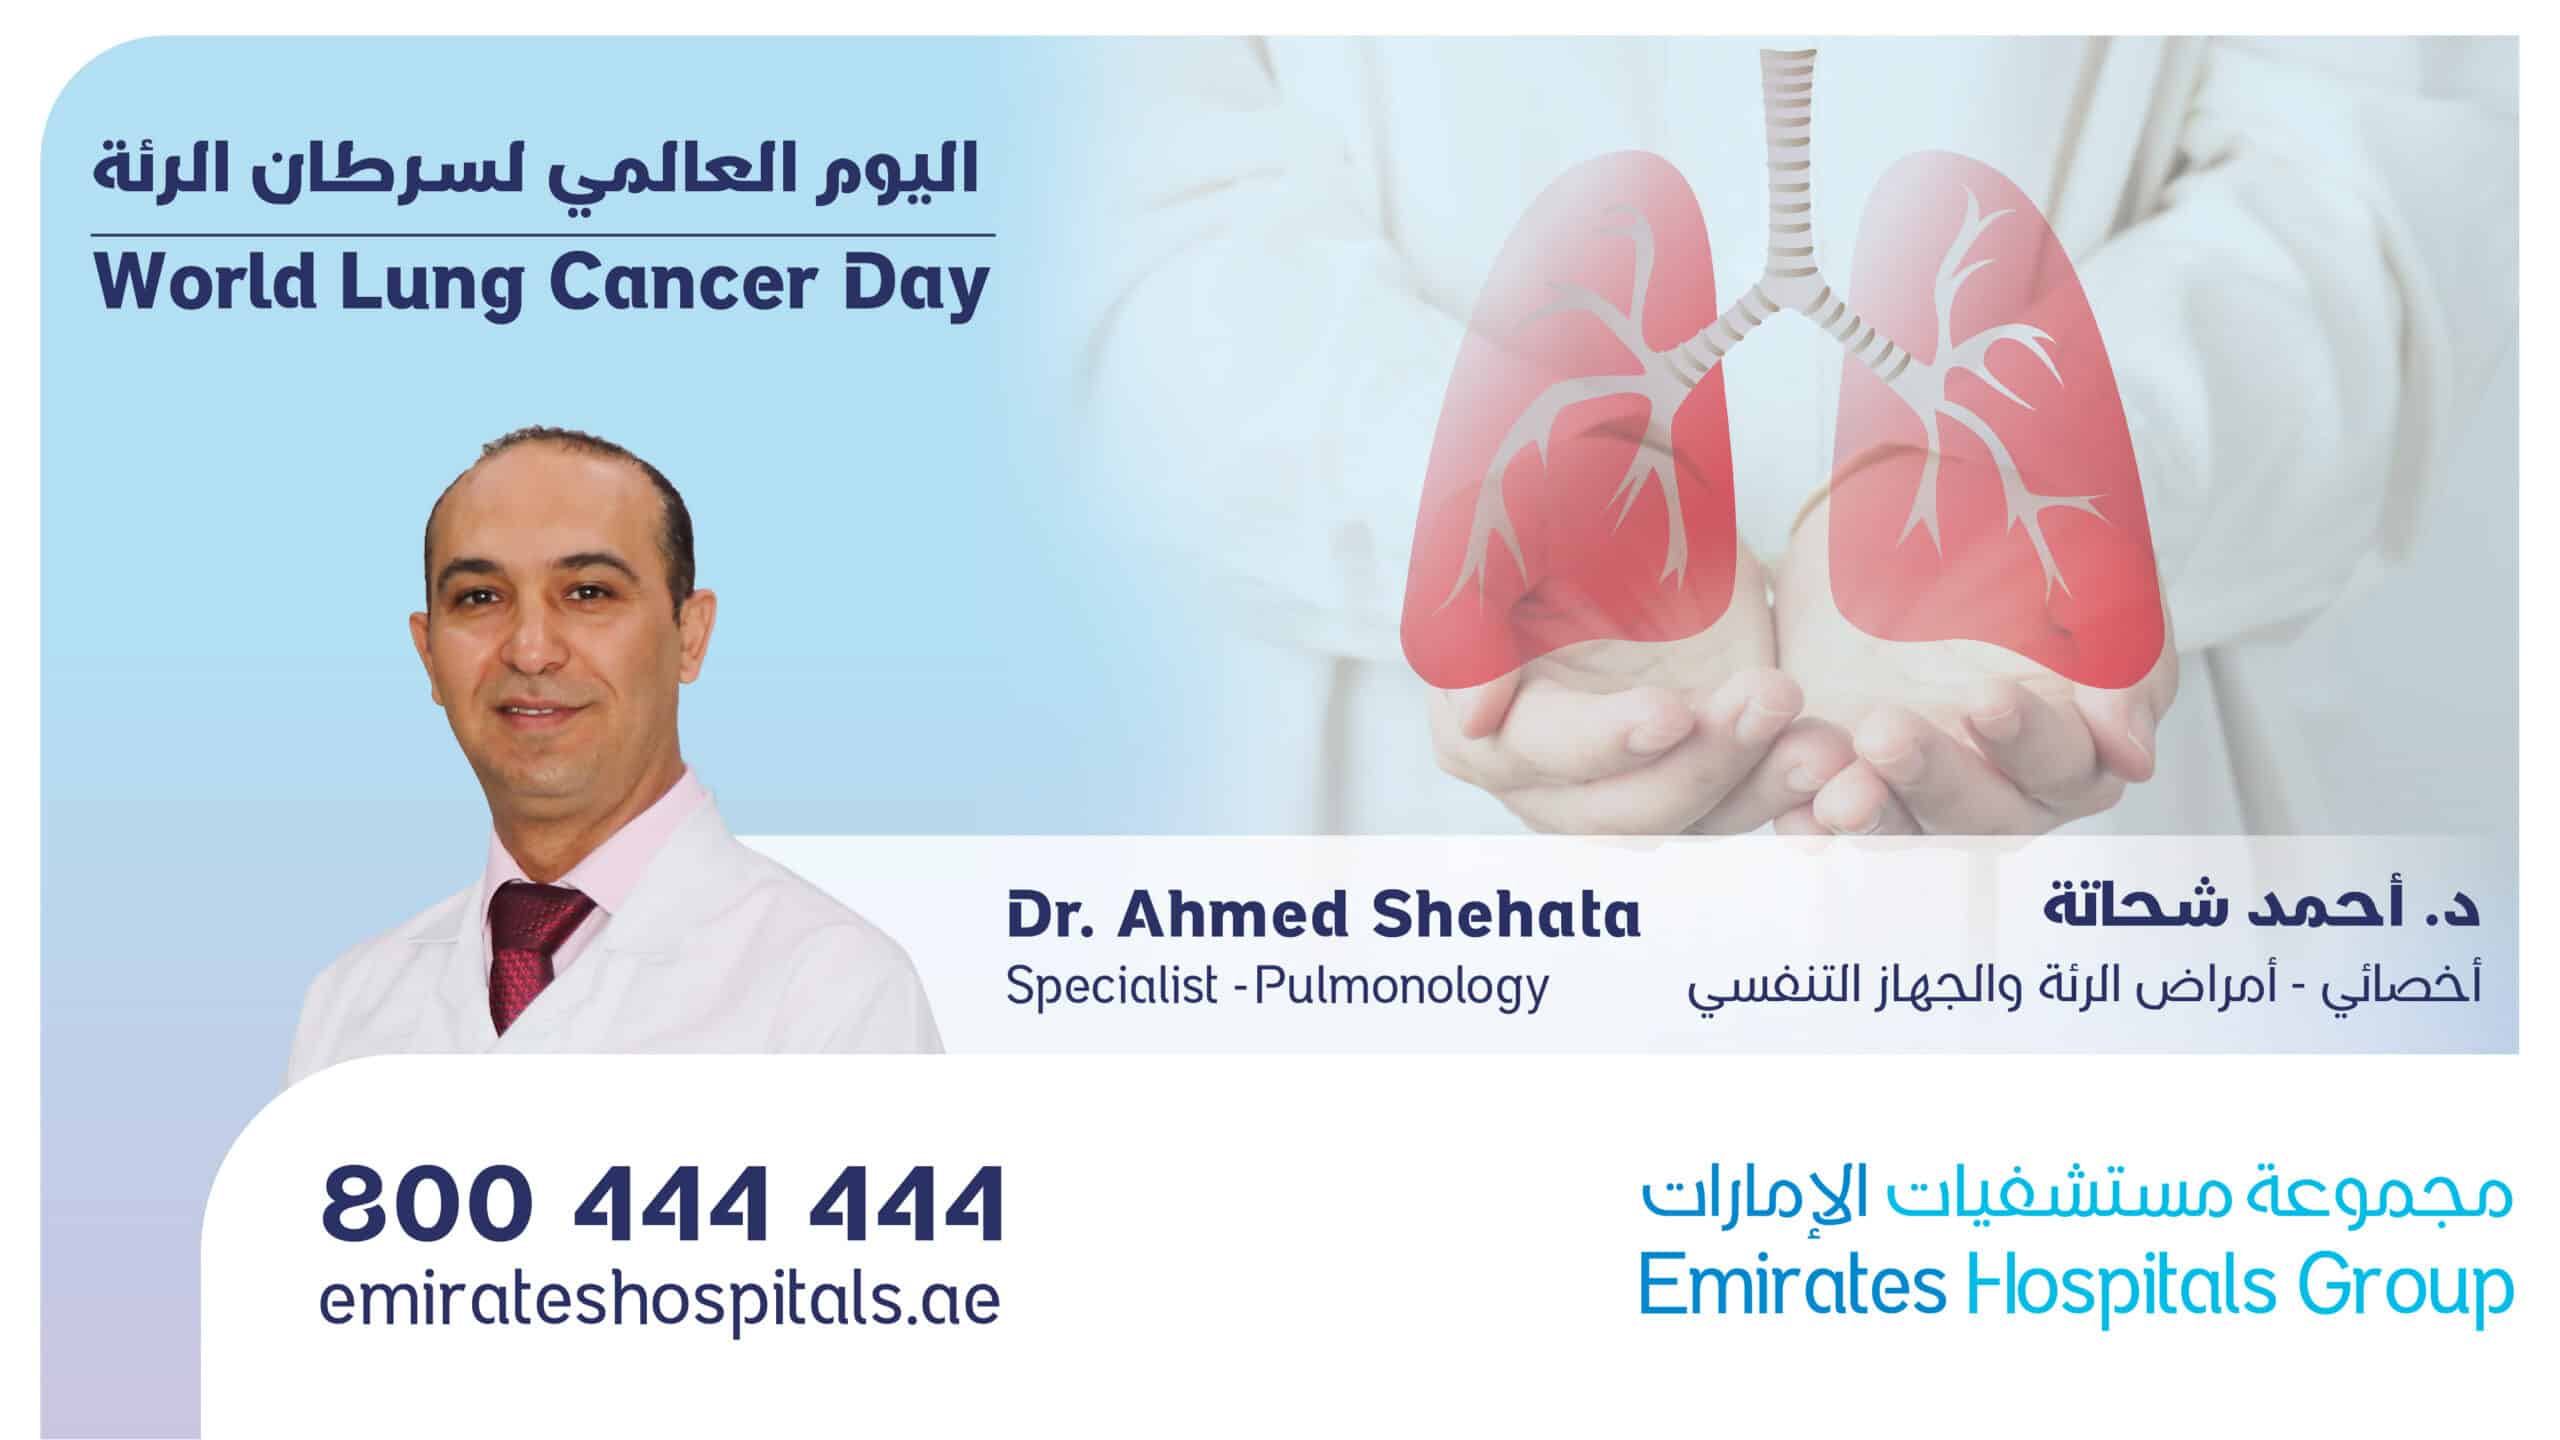 World Lung Cancer Day | Dr. Ahmed Shehata Specialist Pulmonology